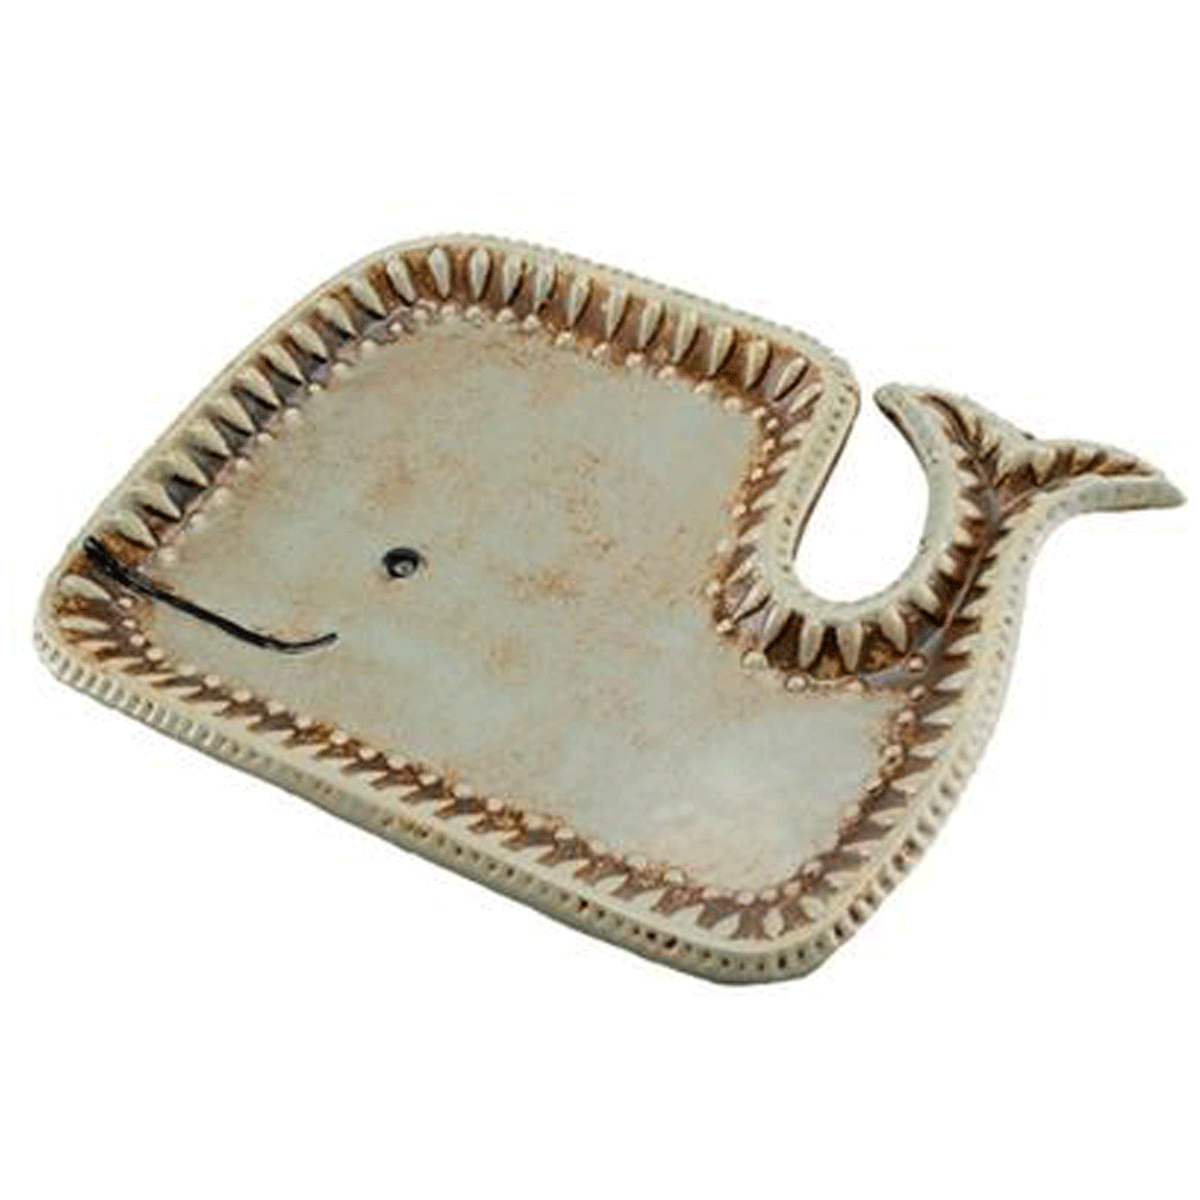 Decorative tray shaped like a whale featuring carved designs on the edges